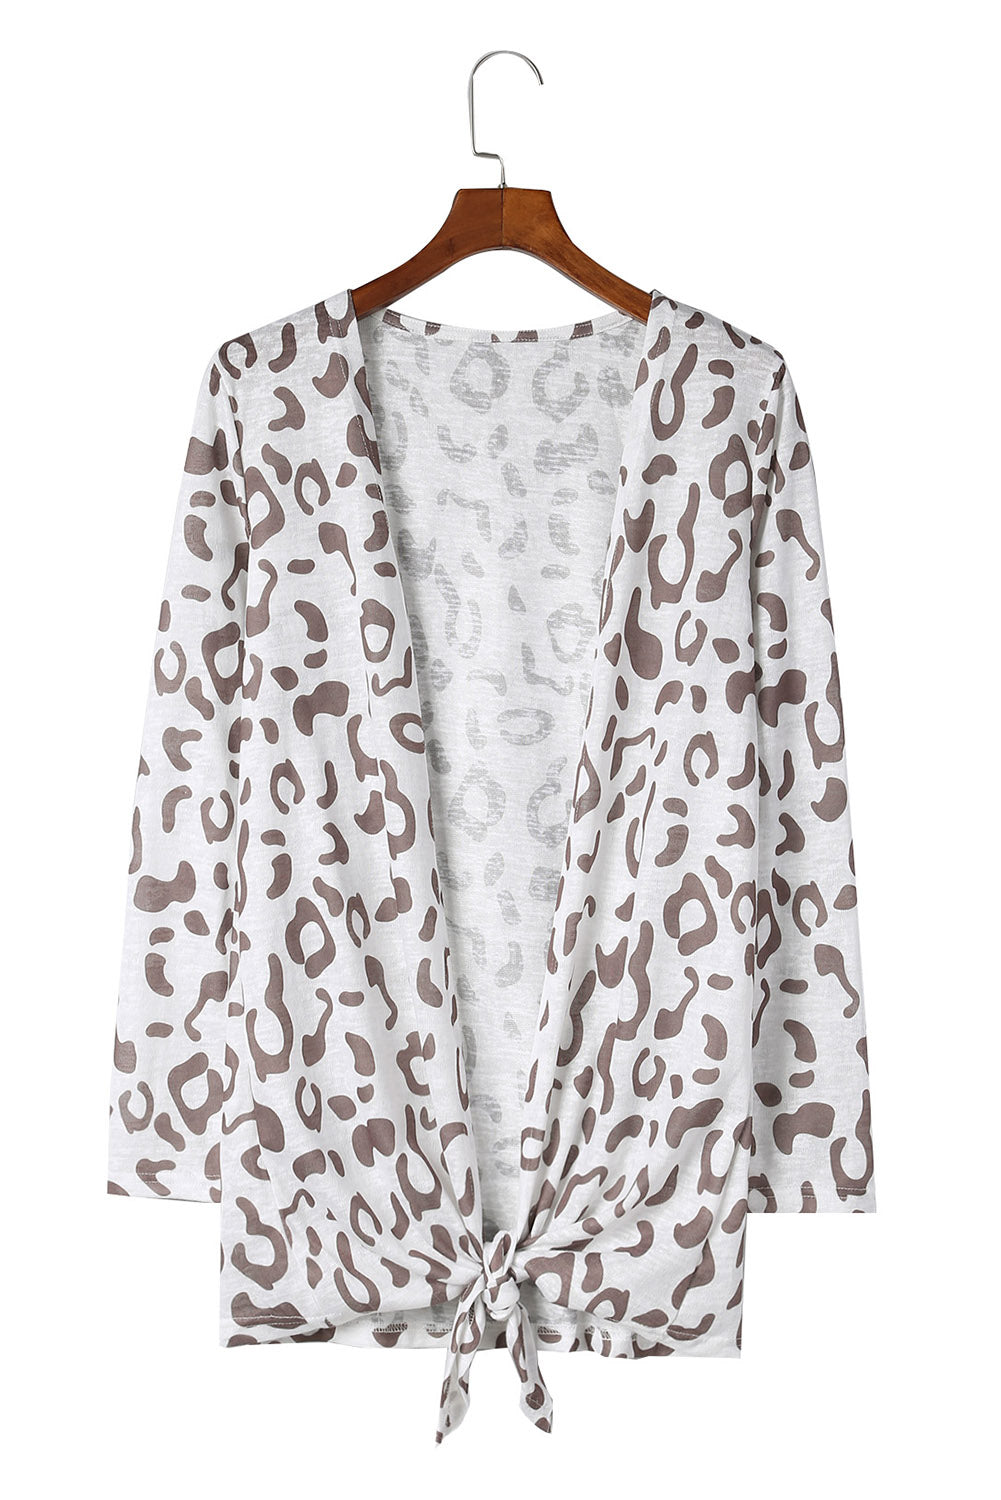 Leopard Long-Sleeve Open Front Cardigan - Women’s Clothing & Accessories - Dresses - 11 - 2024